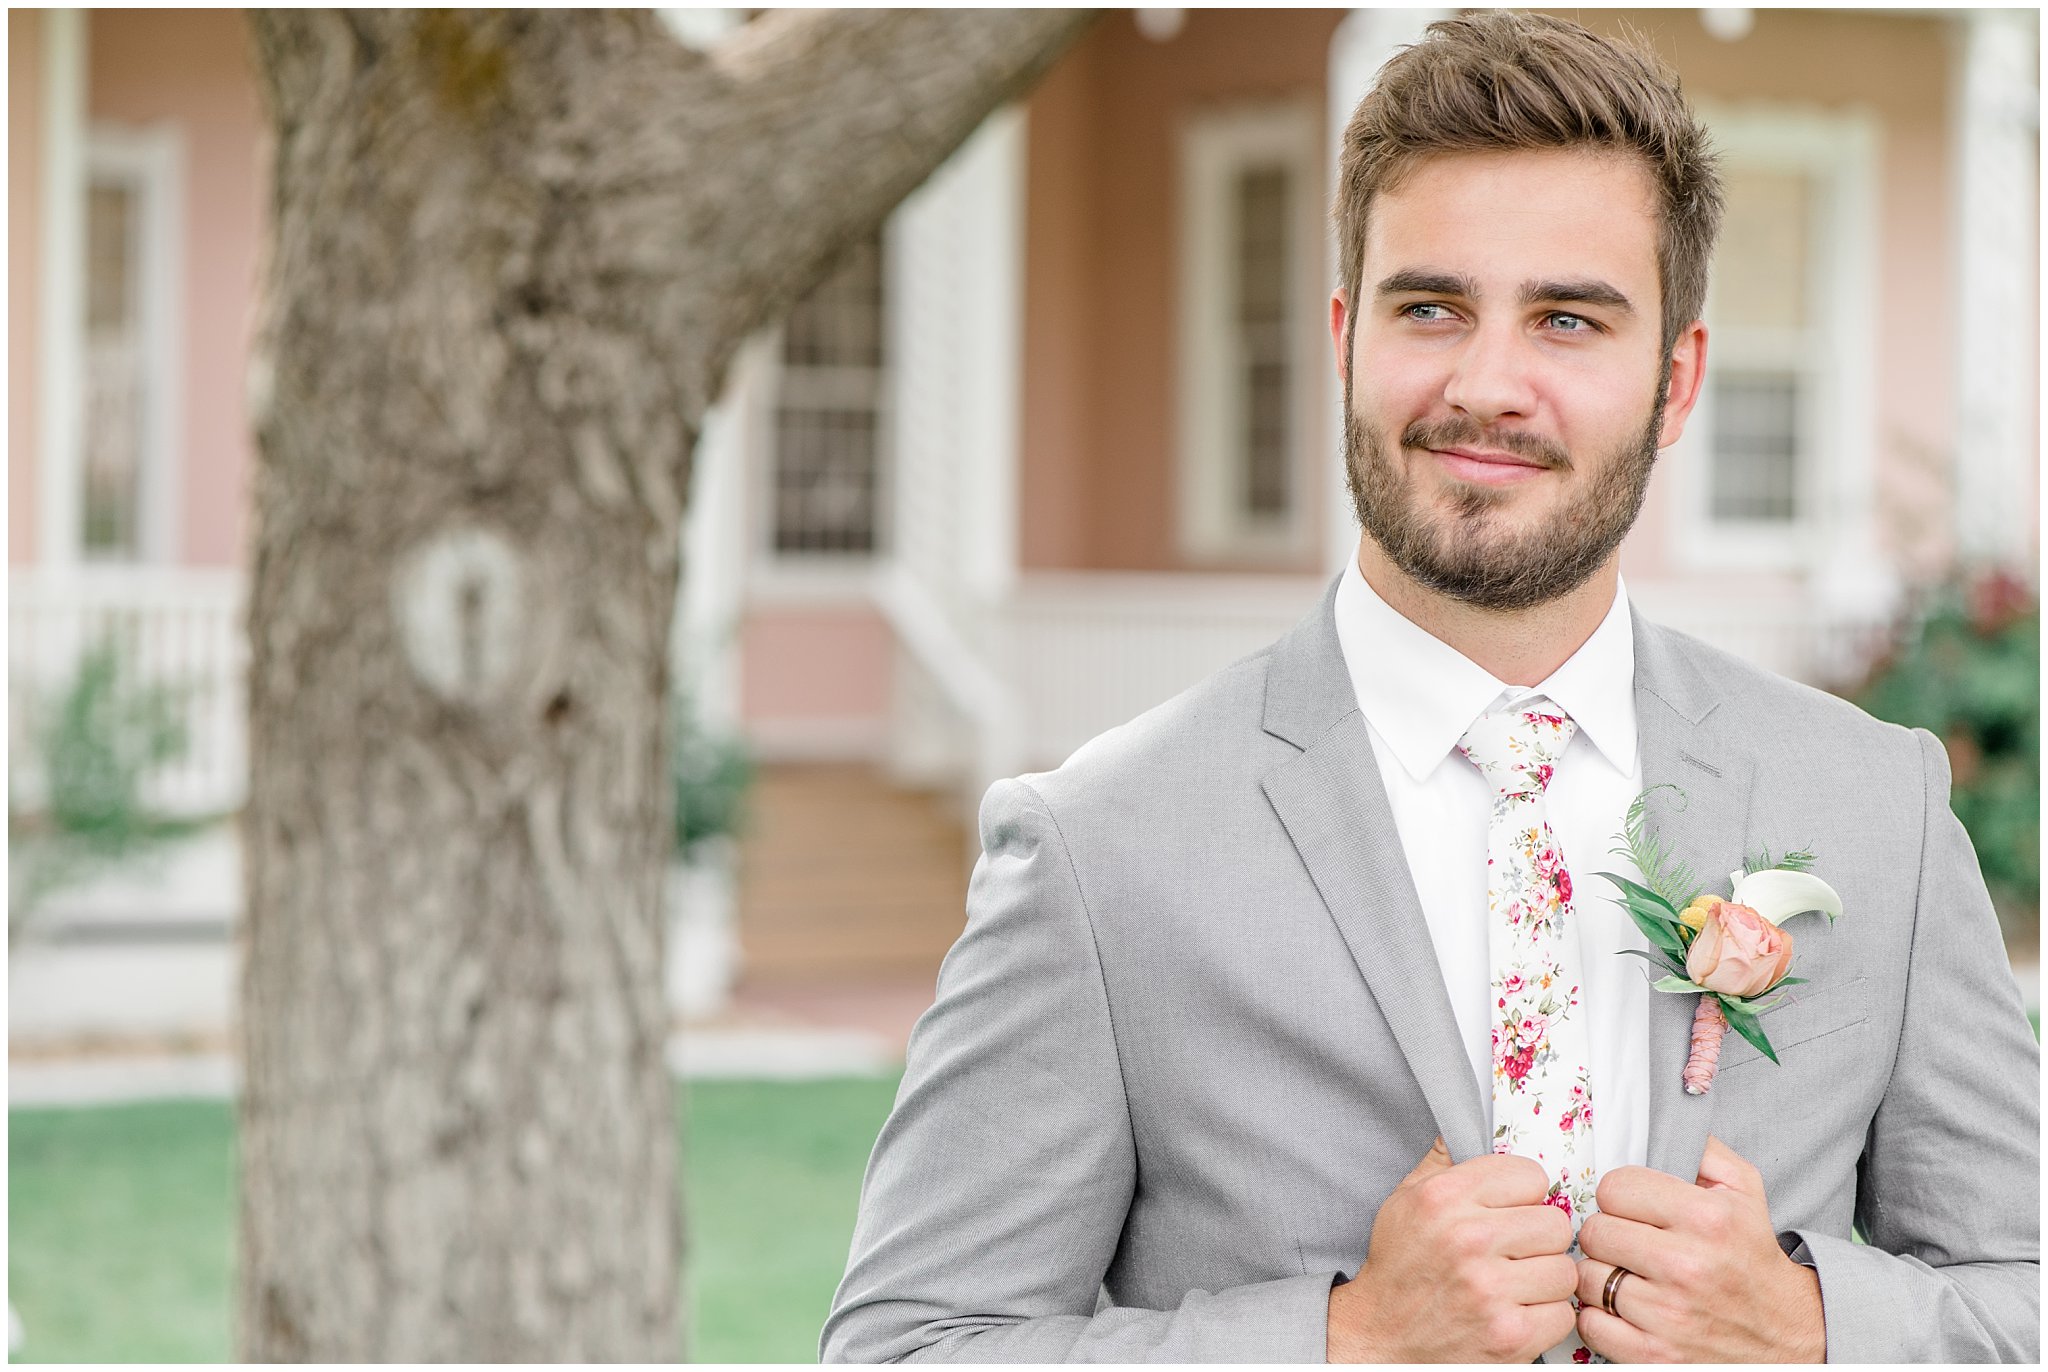 Groom in grey suit and floral tie | This is the Place Heritage Park | Green and Pink Garden Wedding | Jessie and Dallin Photography